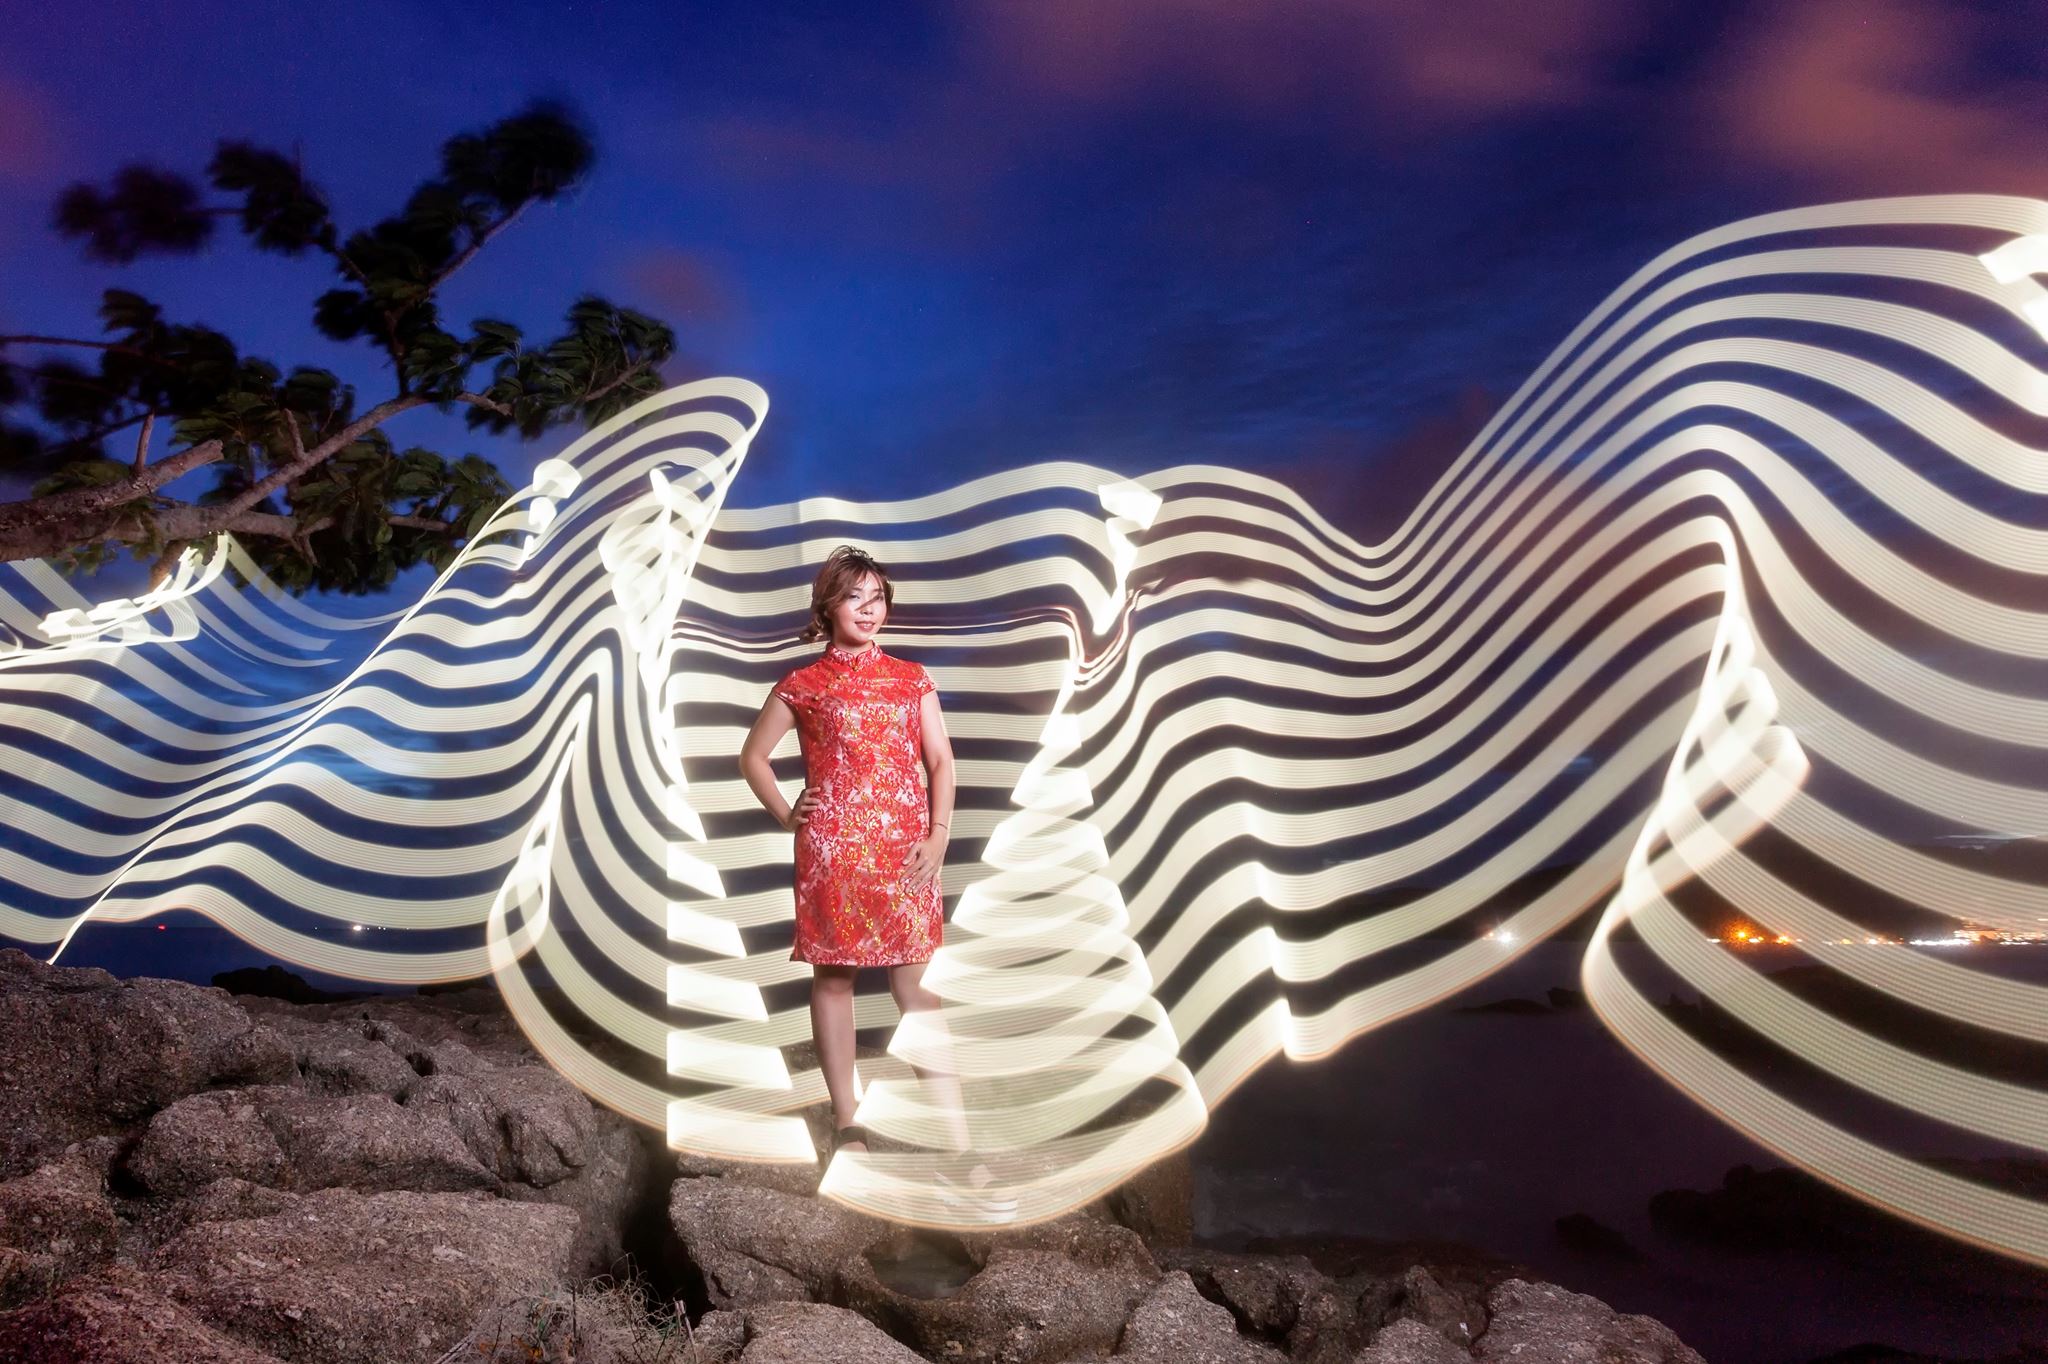 7 Killer Light Painting Tips For Epic Night Images